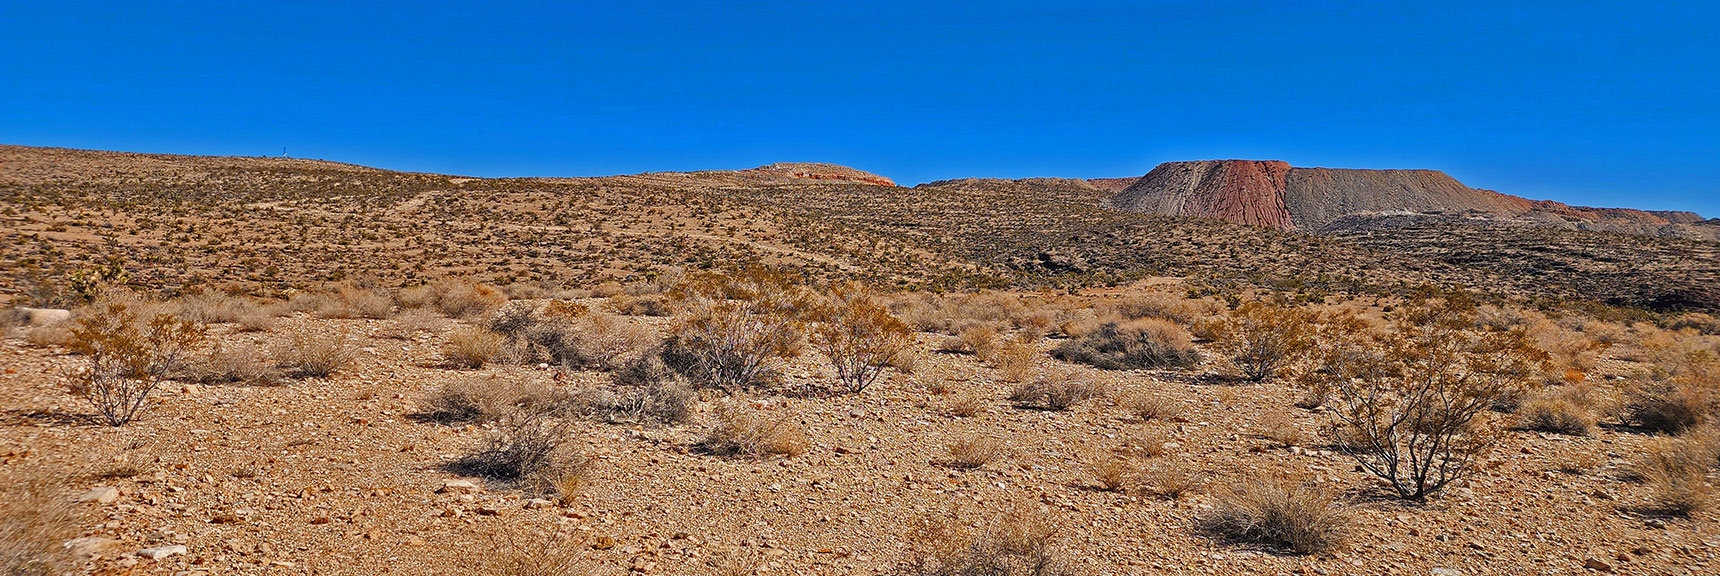 Arrival At Summit of Cat in the Hat Trail, Looking East to Maverick Windsock Hill | Western Trails and Ridges | Blue Diamond Hill | Red Rock Canyon, Nevada